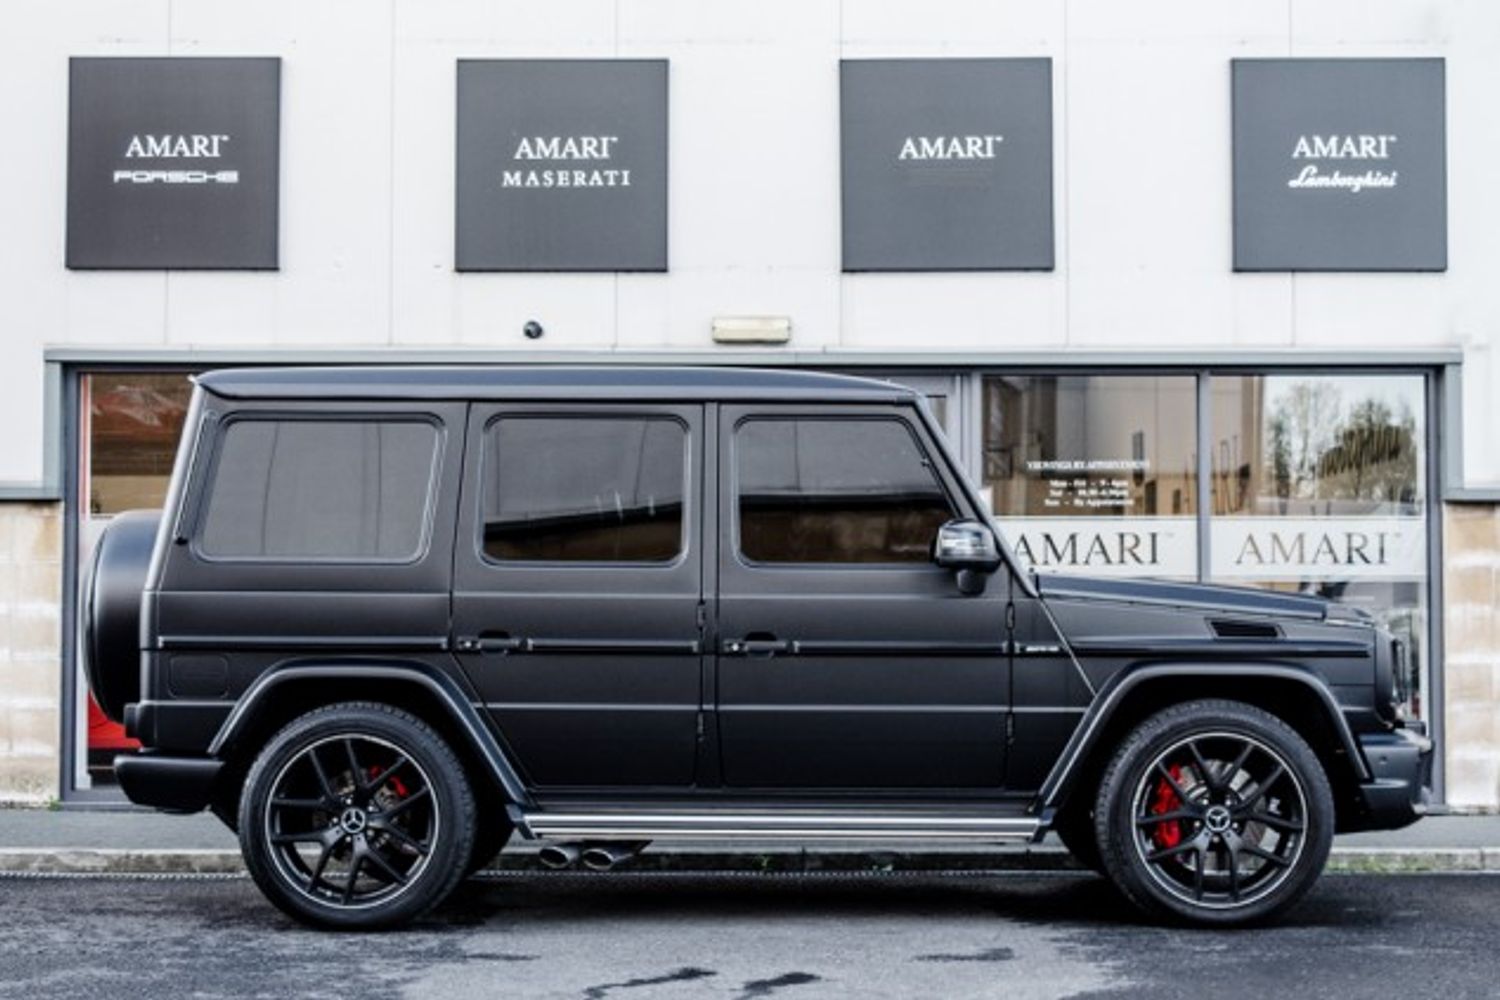 MERCEDES-BENZ G-CLASS ESTATE 5.5 AMG G 63 4MATIC EDITION 463 5DR AUTOMATIC